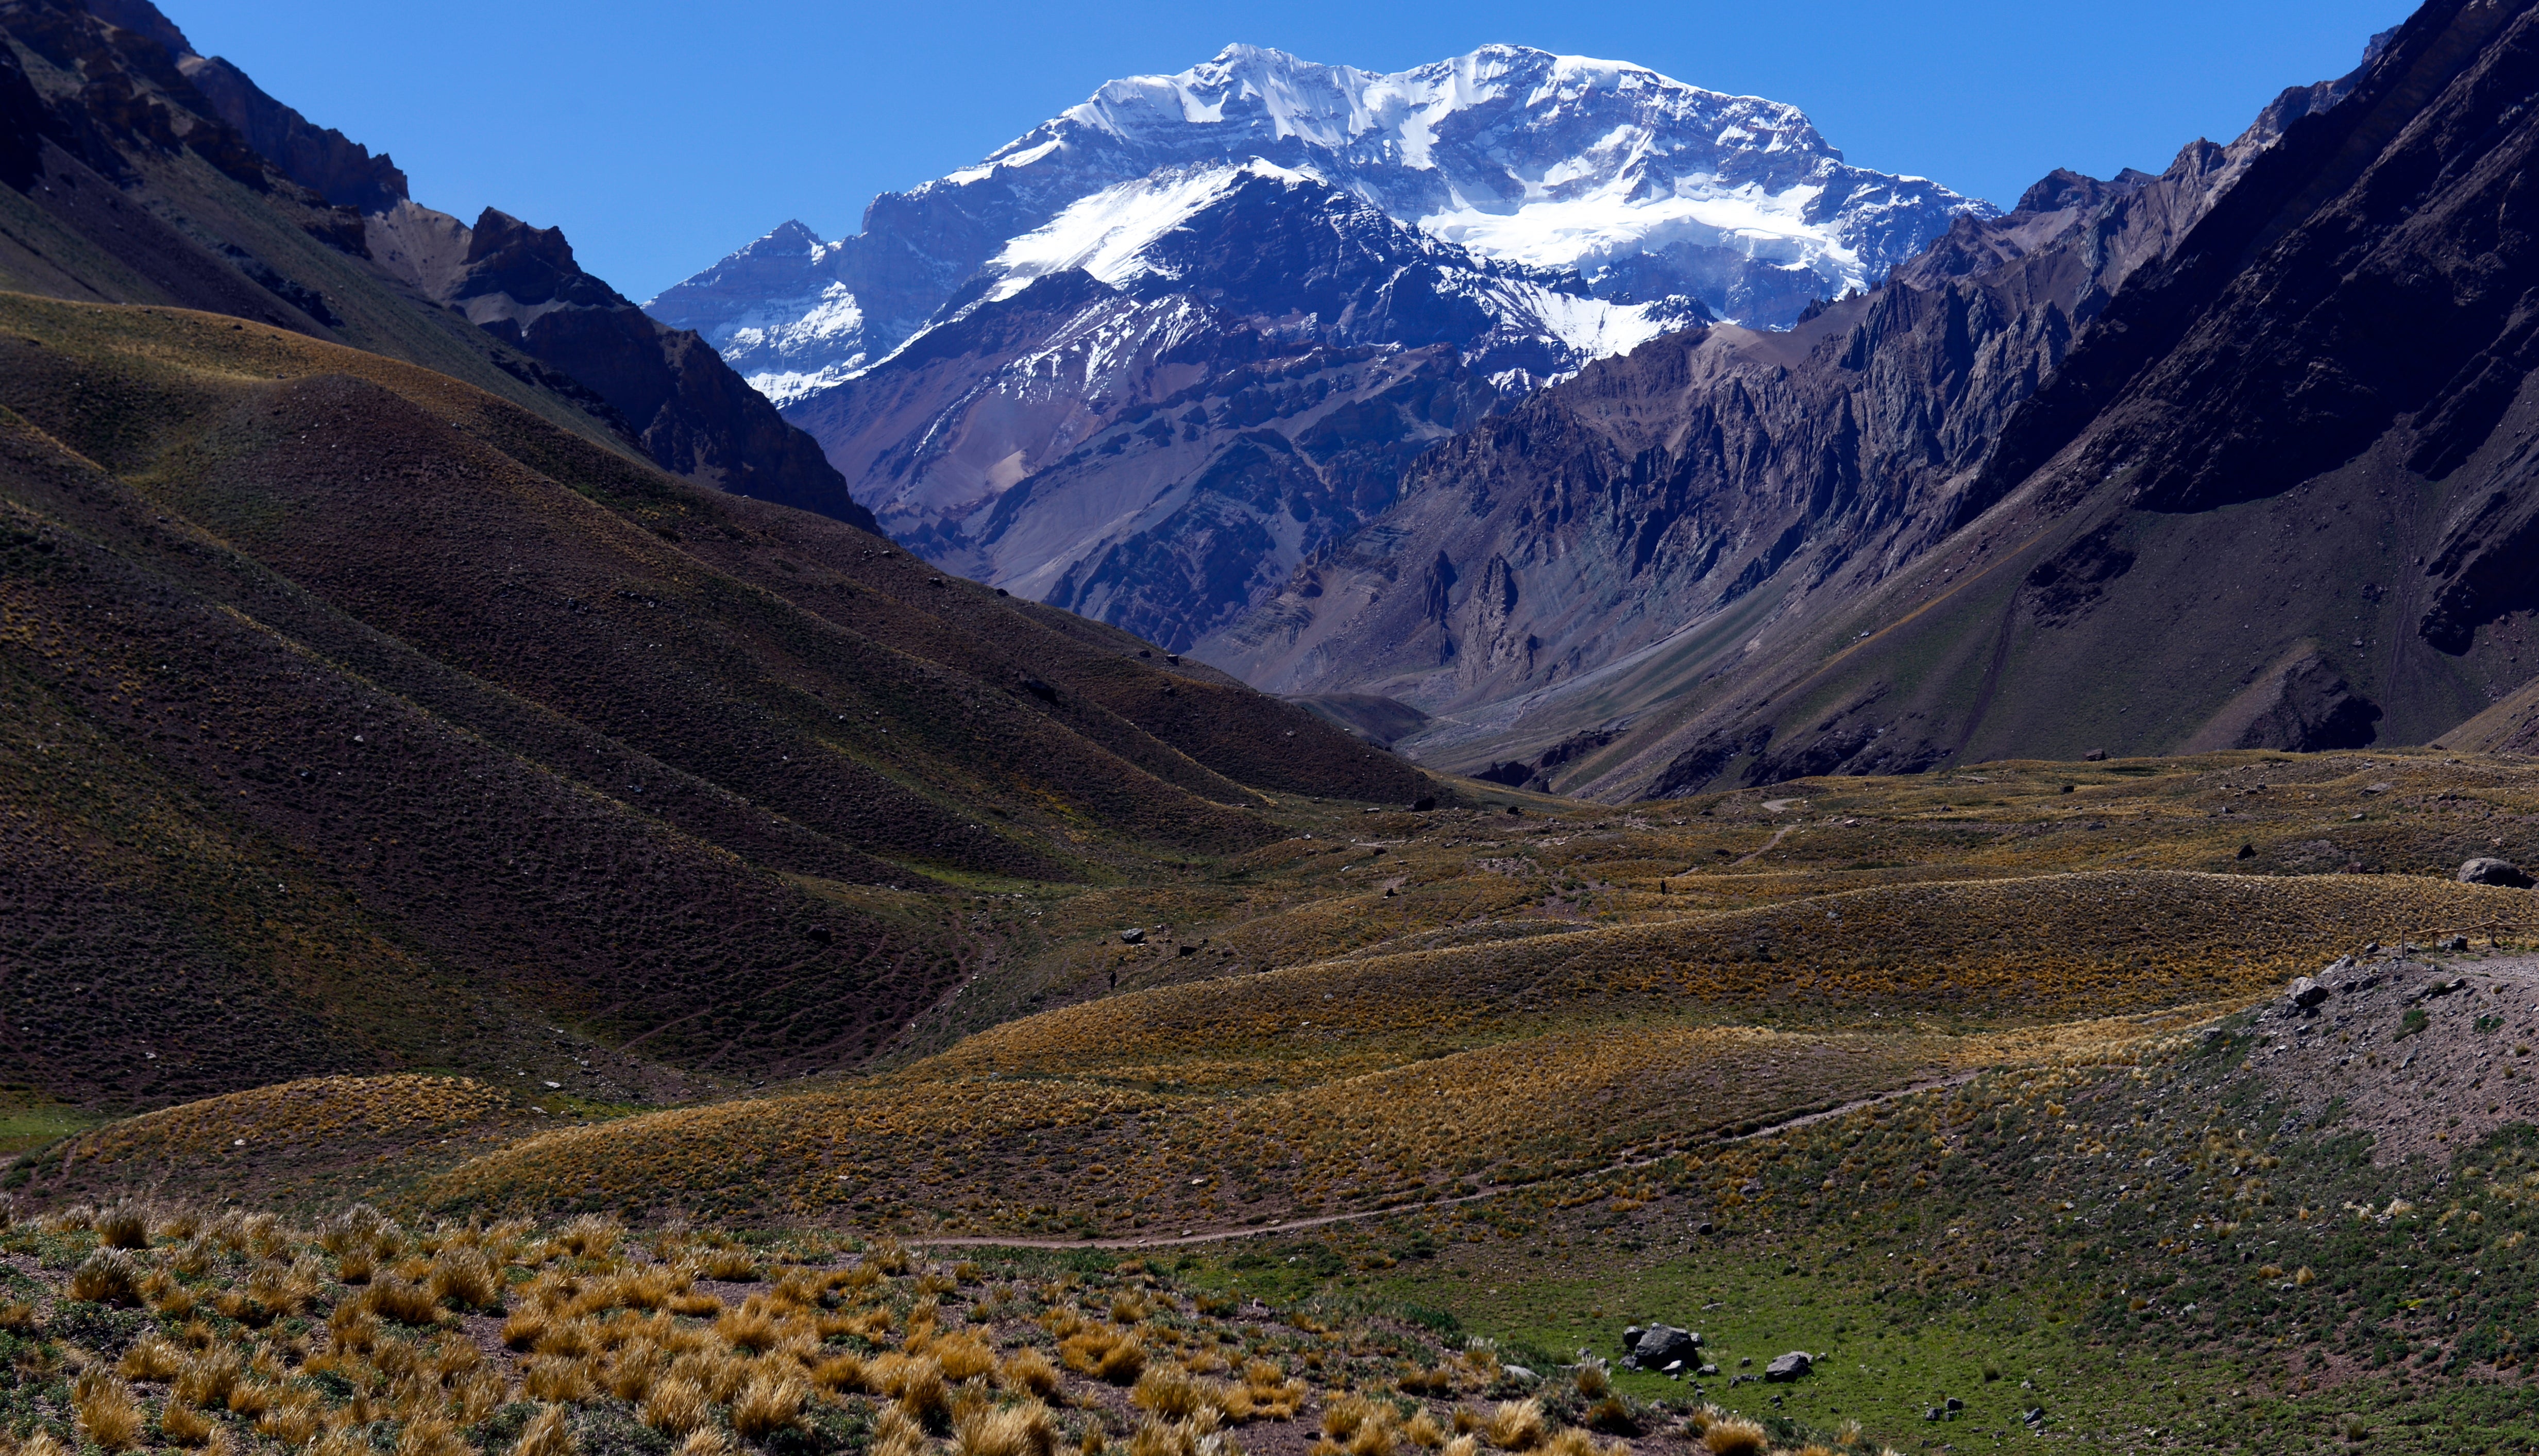 Mount Aconcagua is the highest mountain outside of Asia